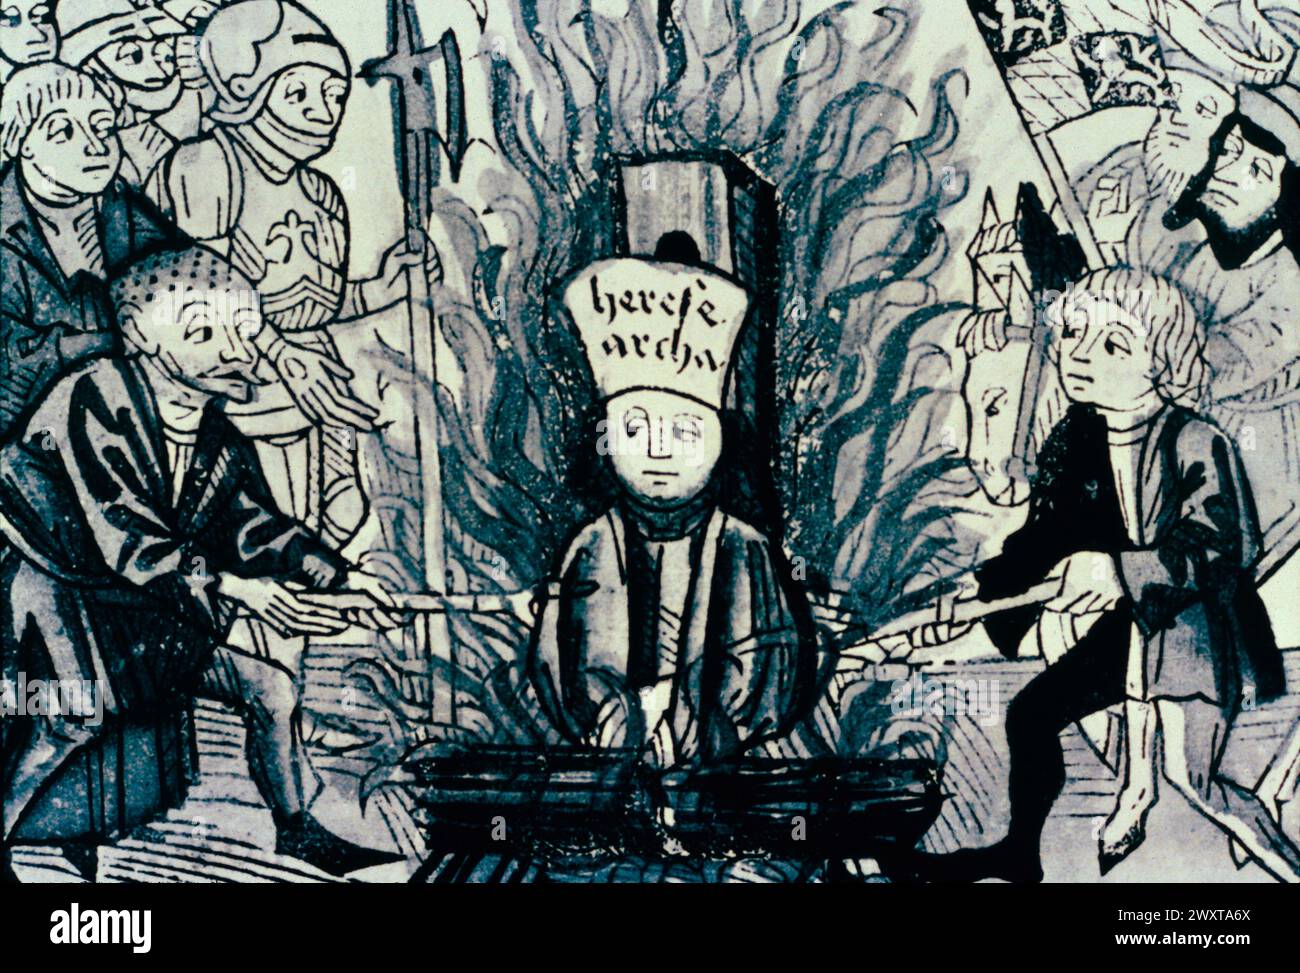 Jan Hus is burned for heresy at the Council of Pisa, woodcut, 14th century Stock Photo